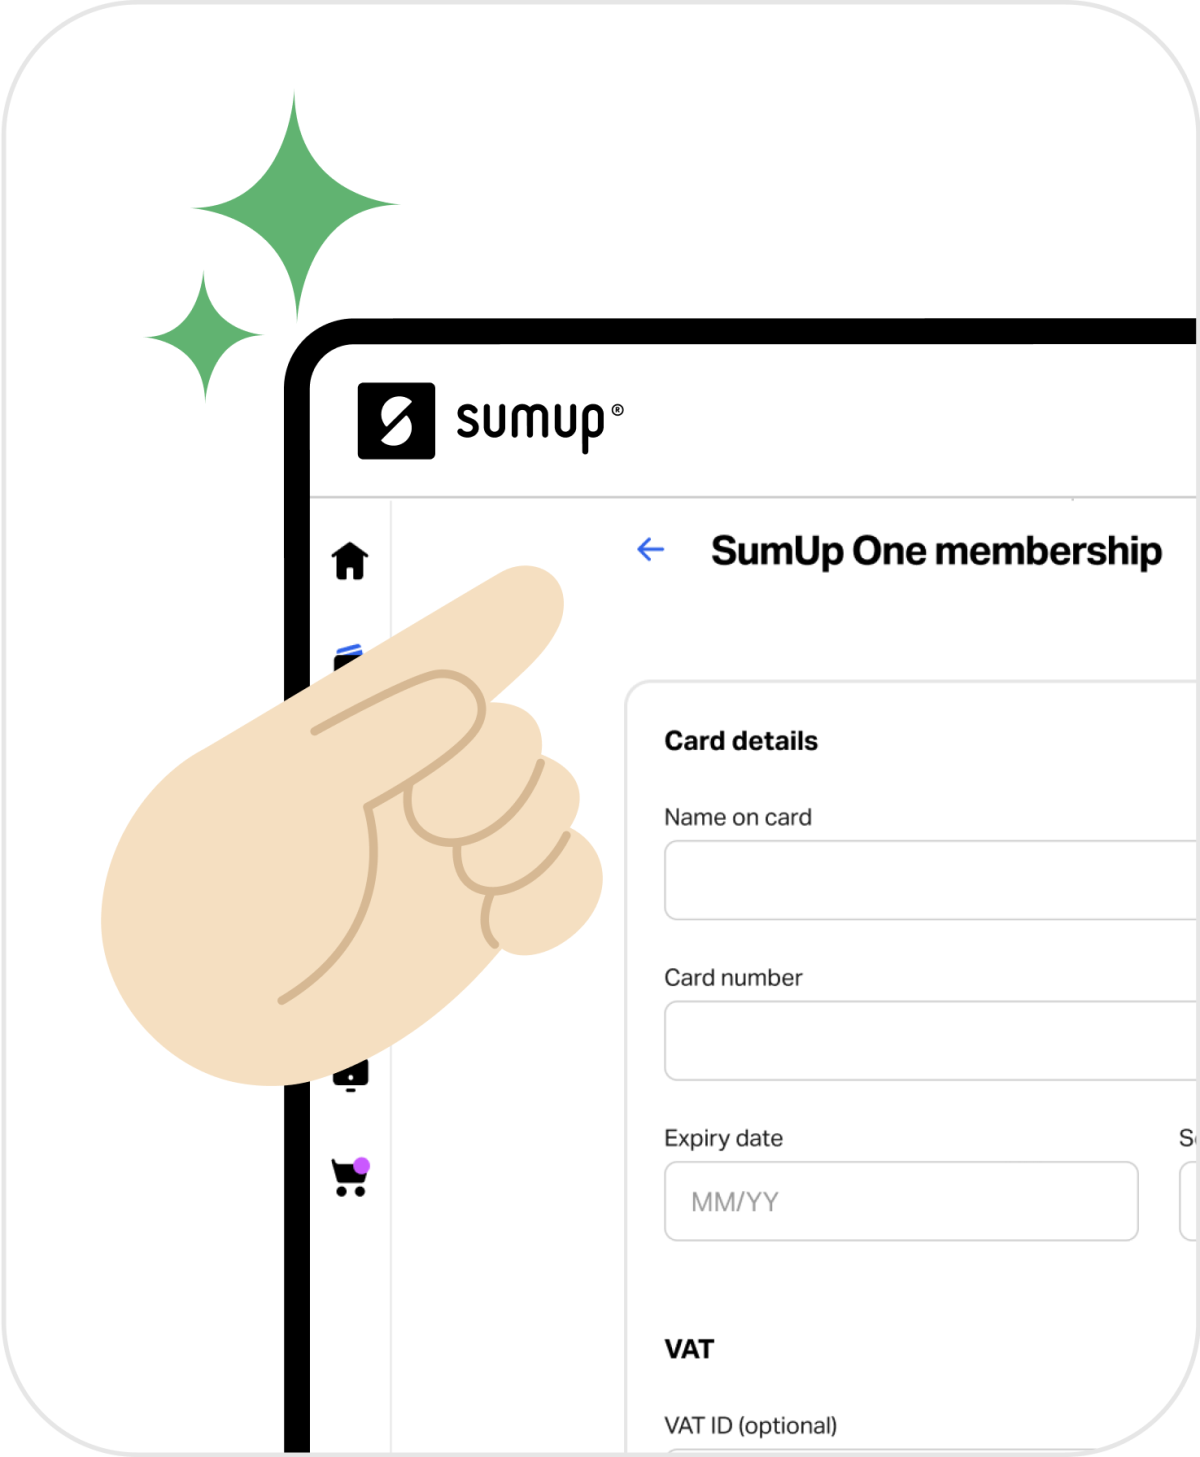 Image showing where to sign up for the sumup one membership